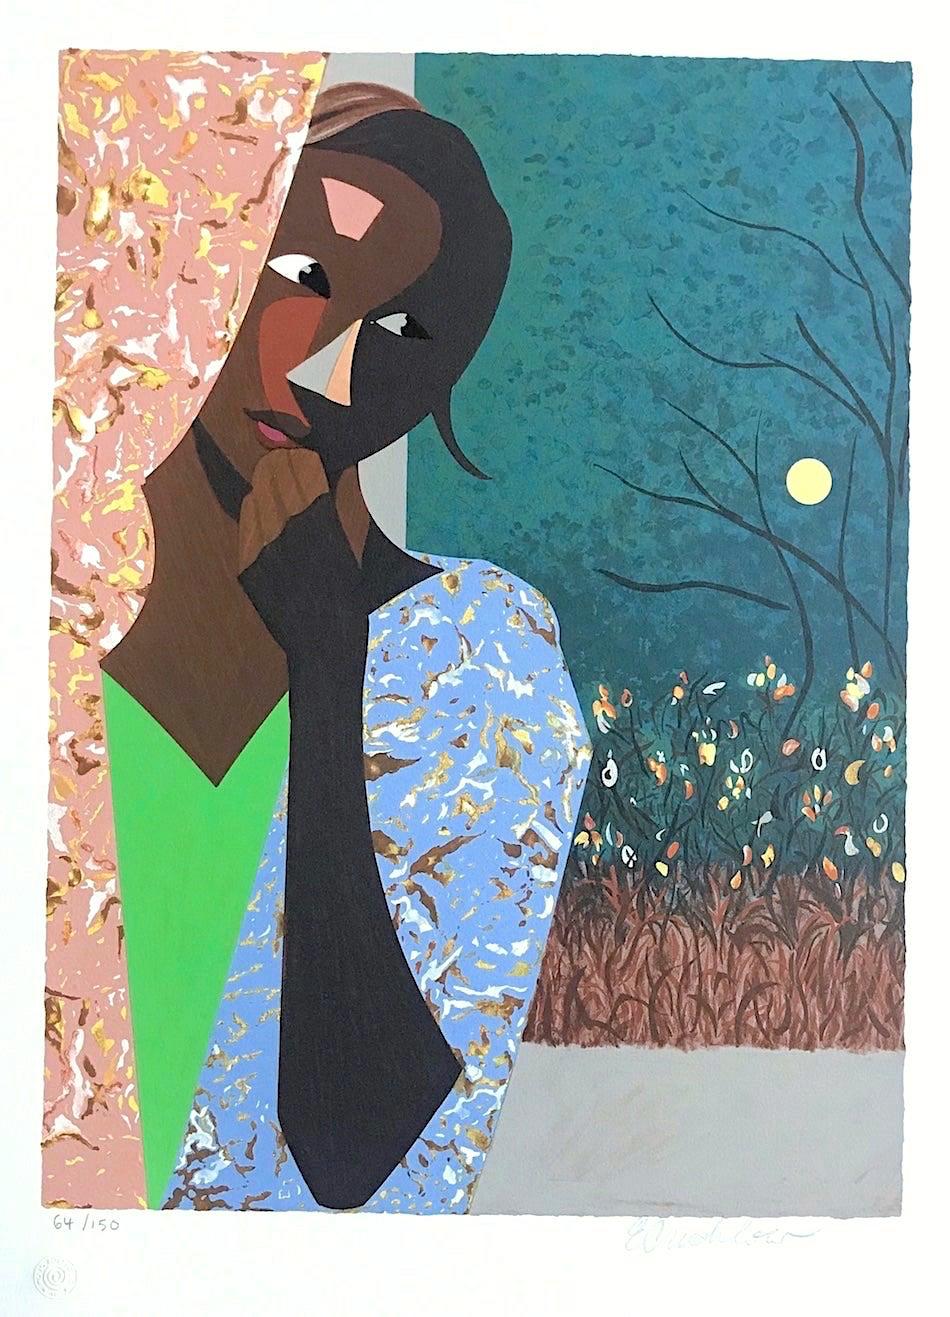 EVENING THOUGHTS Signed Lithograph, Young Black Woman, Color Collage Portrait - Print by Ernest Crichlow